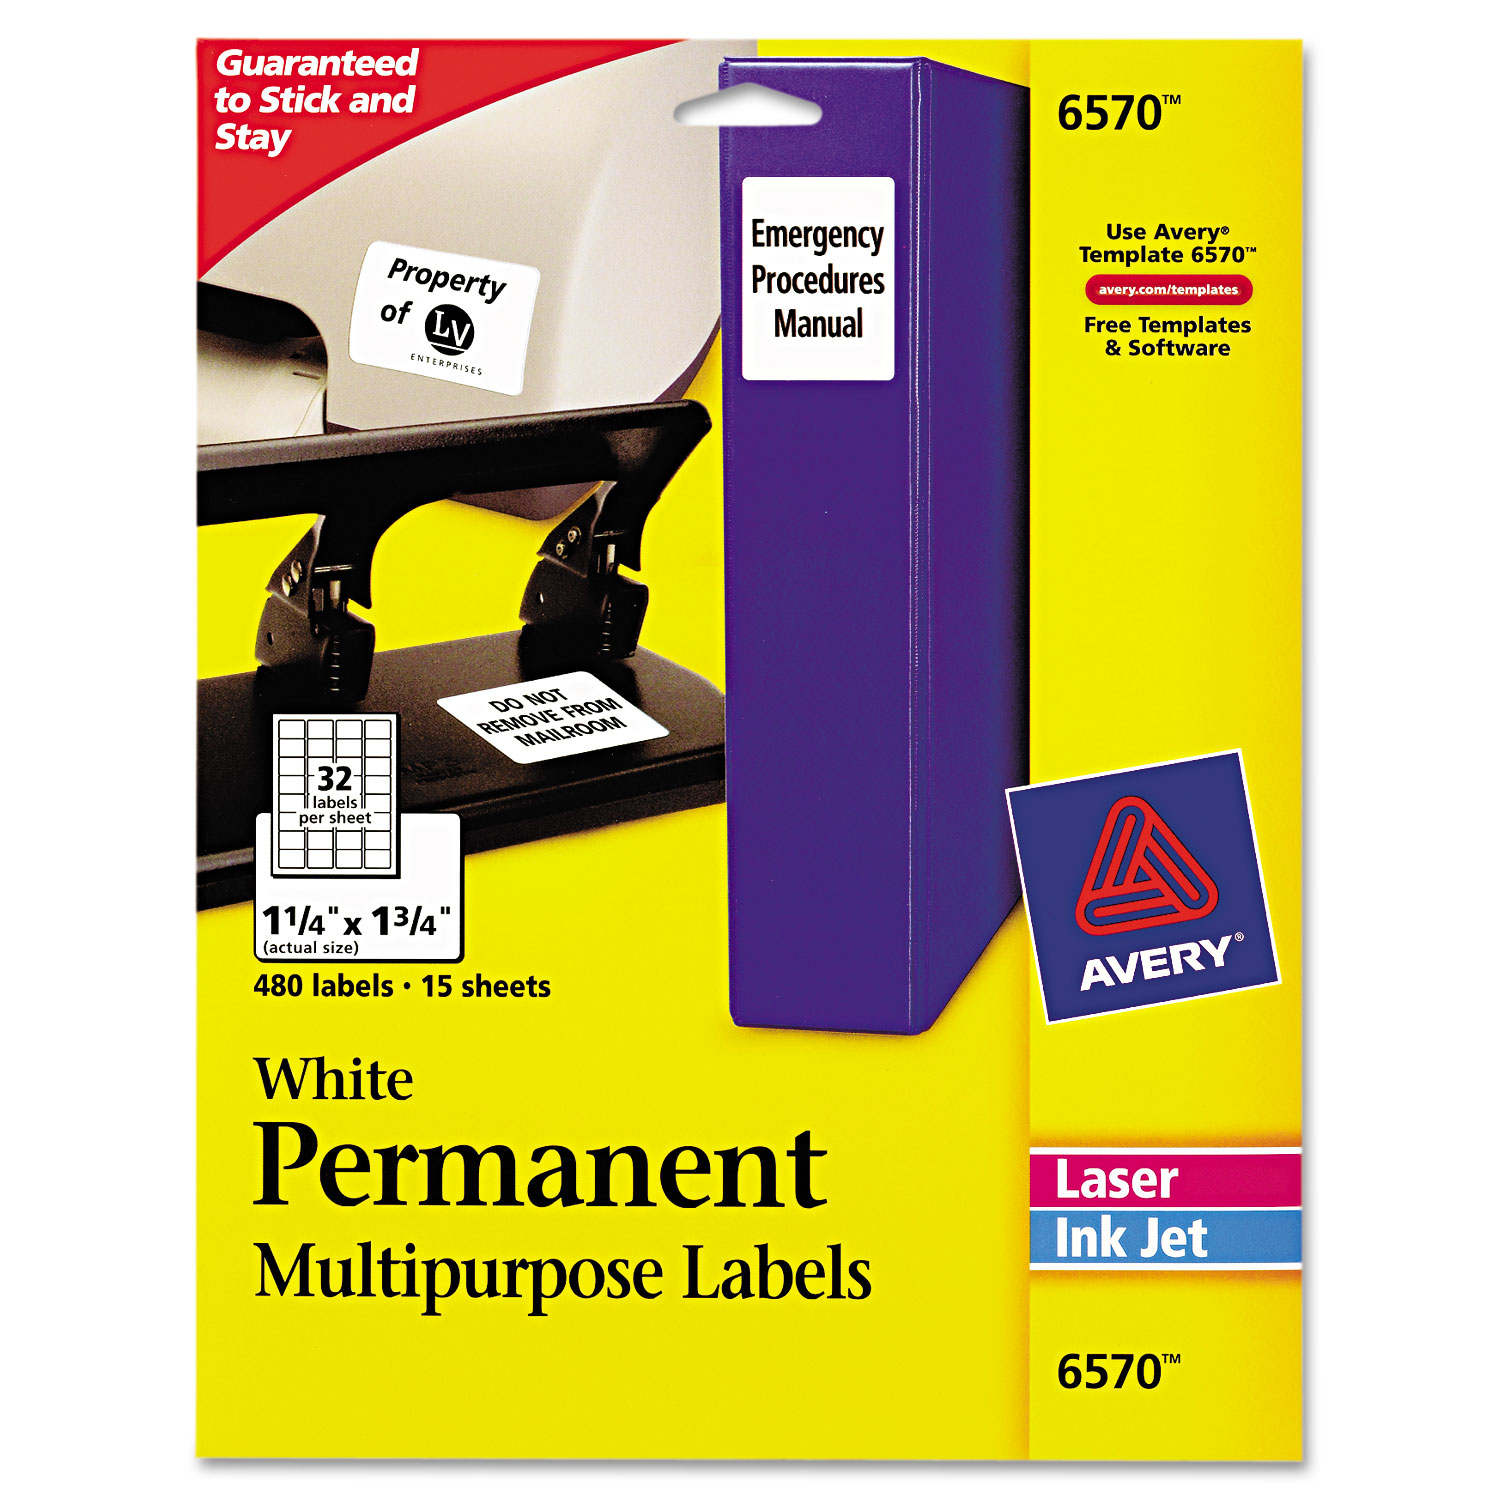  Avery 06570 Permanent ID Labels w/ Sure Feed Technology, Inkjet/Laser Printers, 1.25 x 1.75, White, 32/Sheet, 15 Sheets/Pack (AVE6570) 